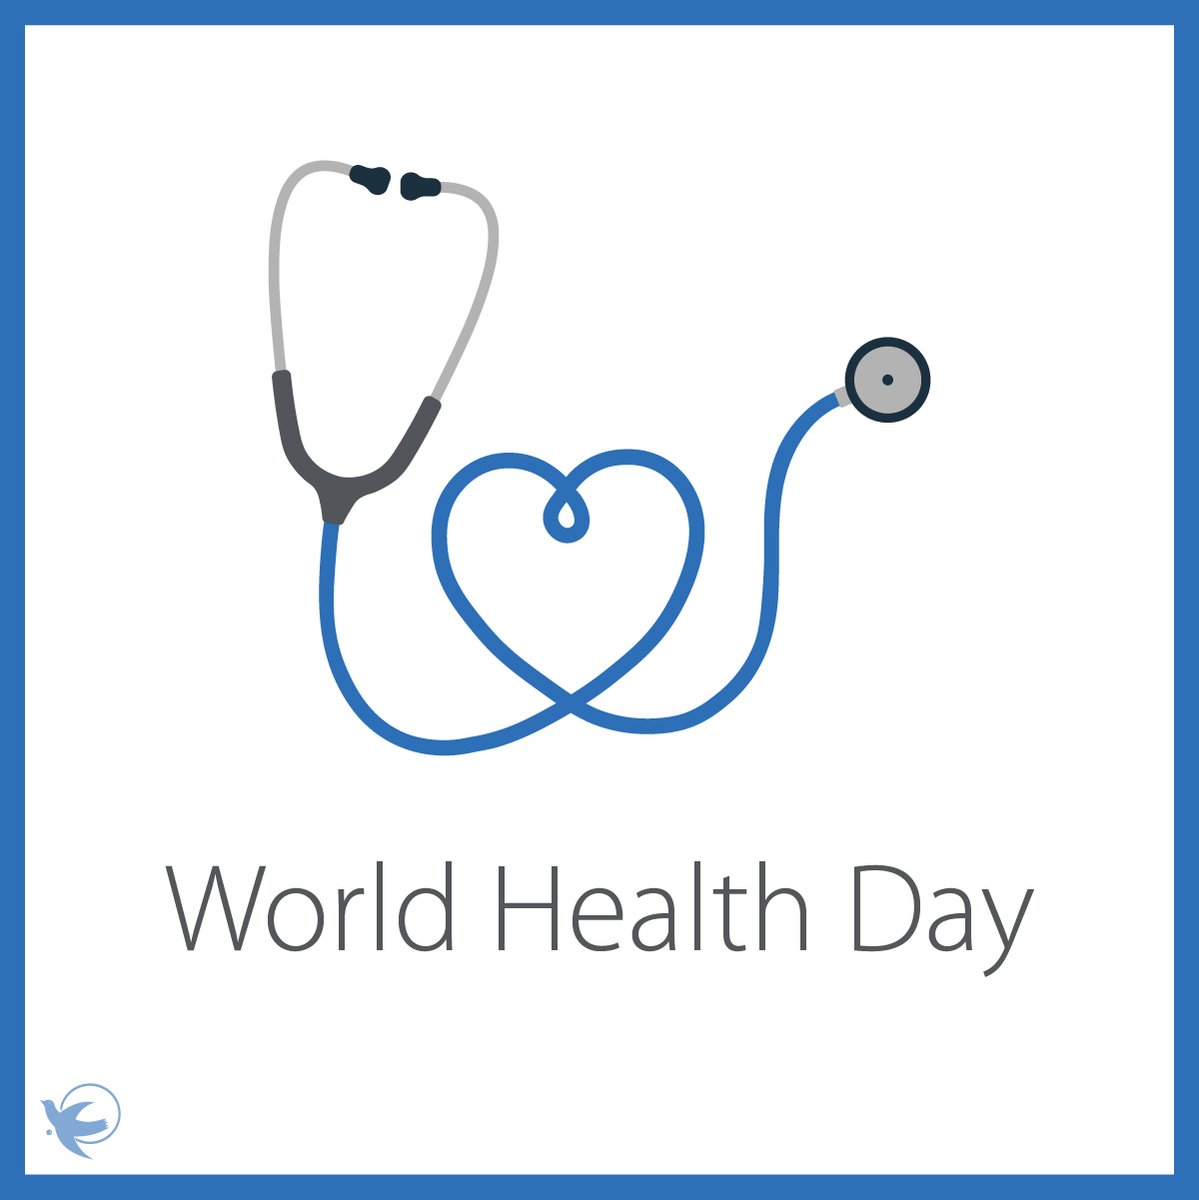 Celebrate #WorldHealthDay by prioritizing your physical and mental #wellbeing. Take small steps towards a healthier lifestyle, like eating nutritious food and staying active. #healthiswealth #StayHealthy #WellnessAwareness